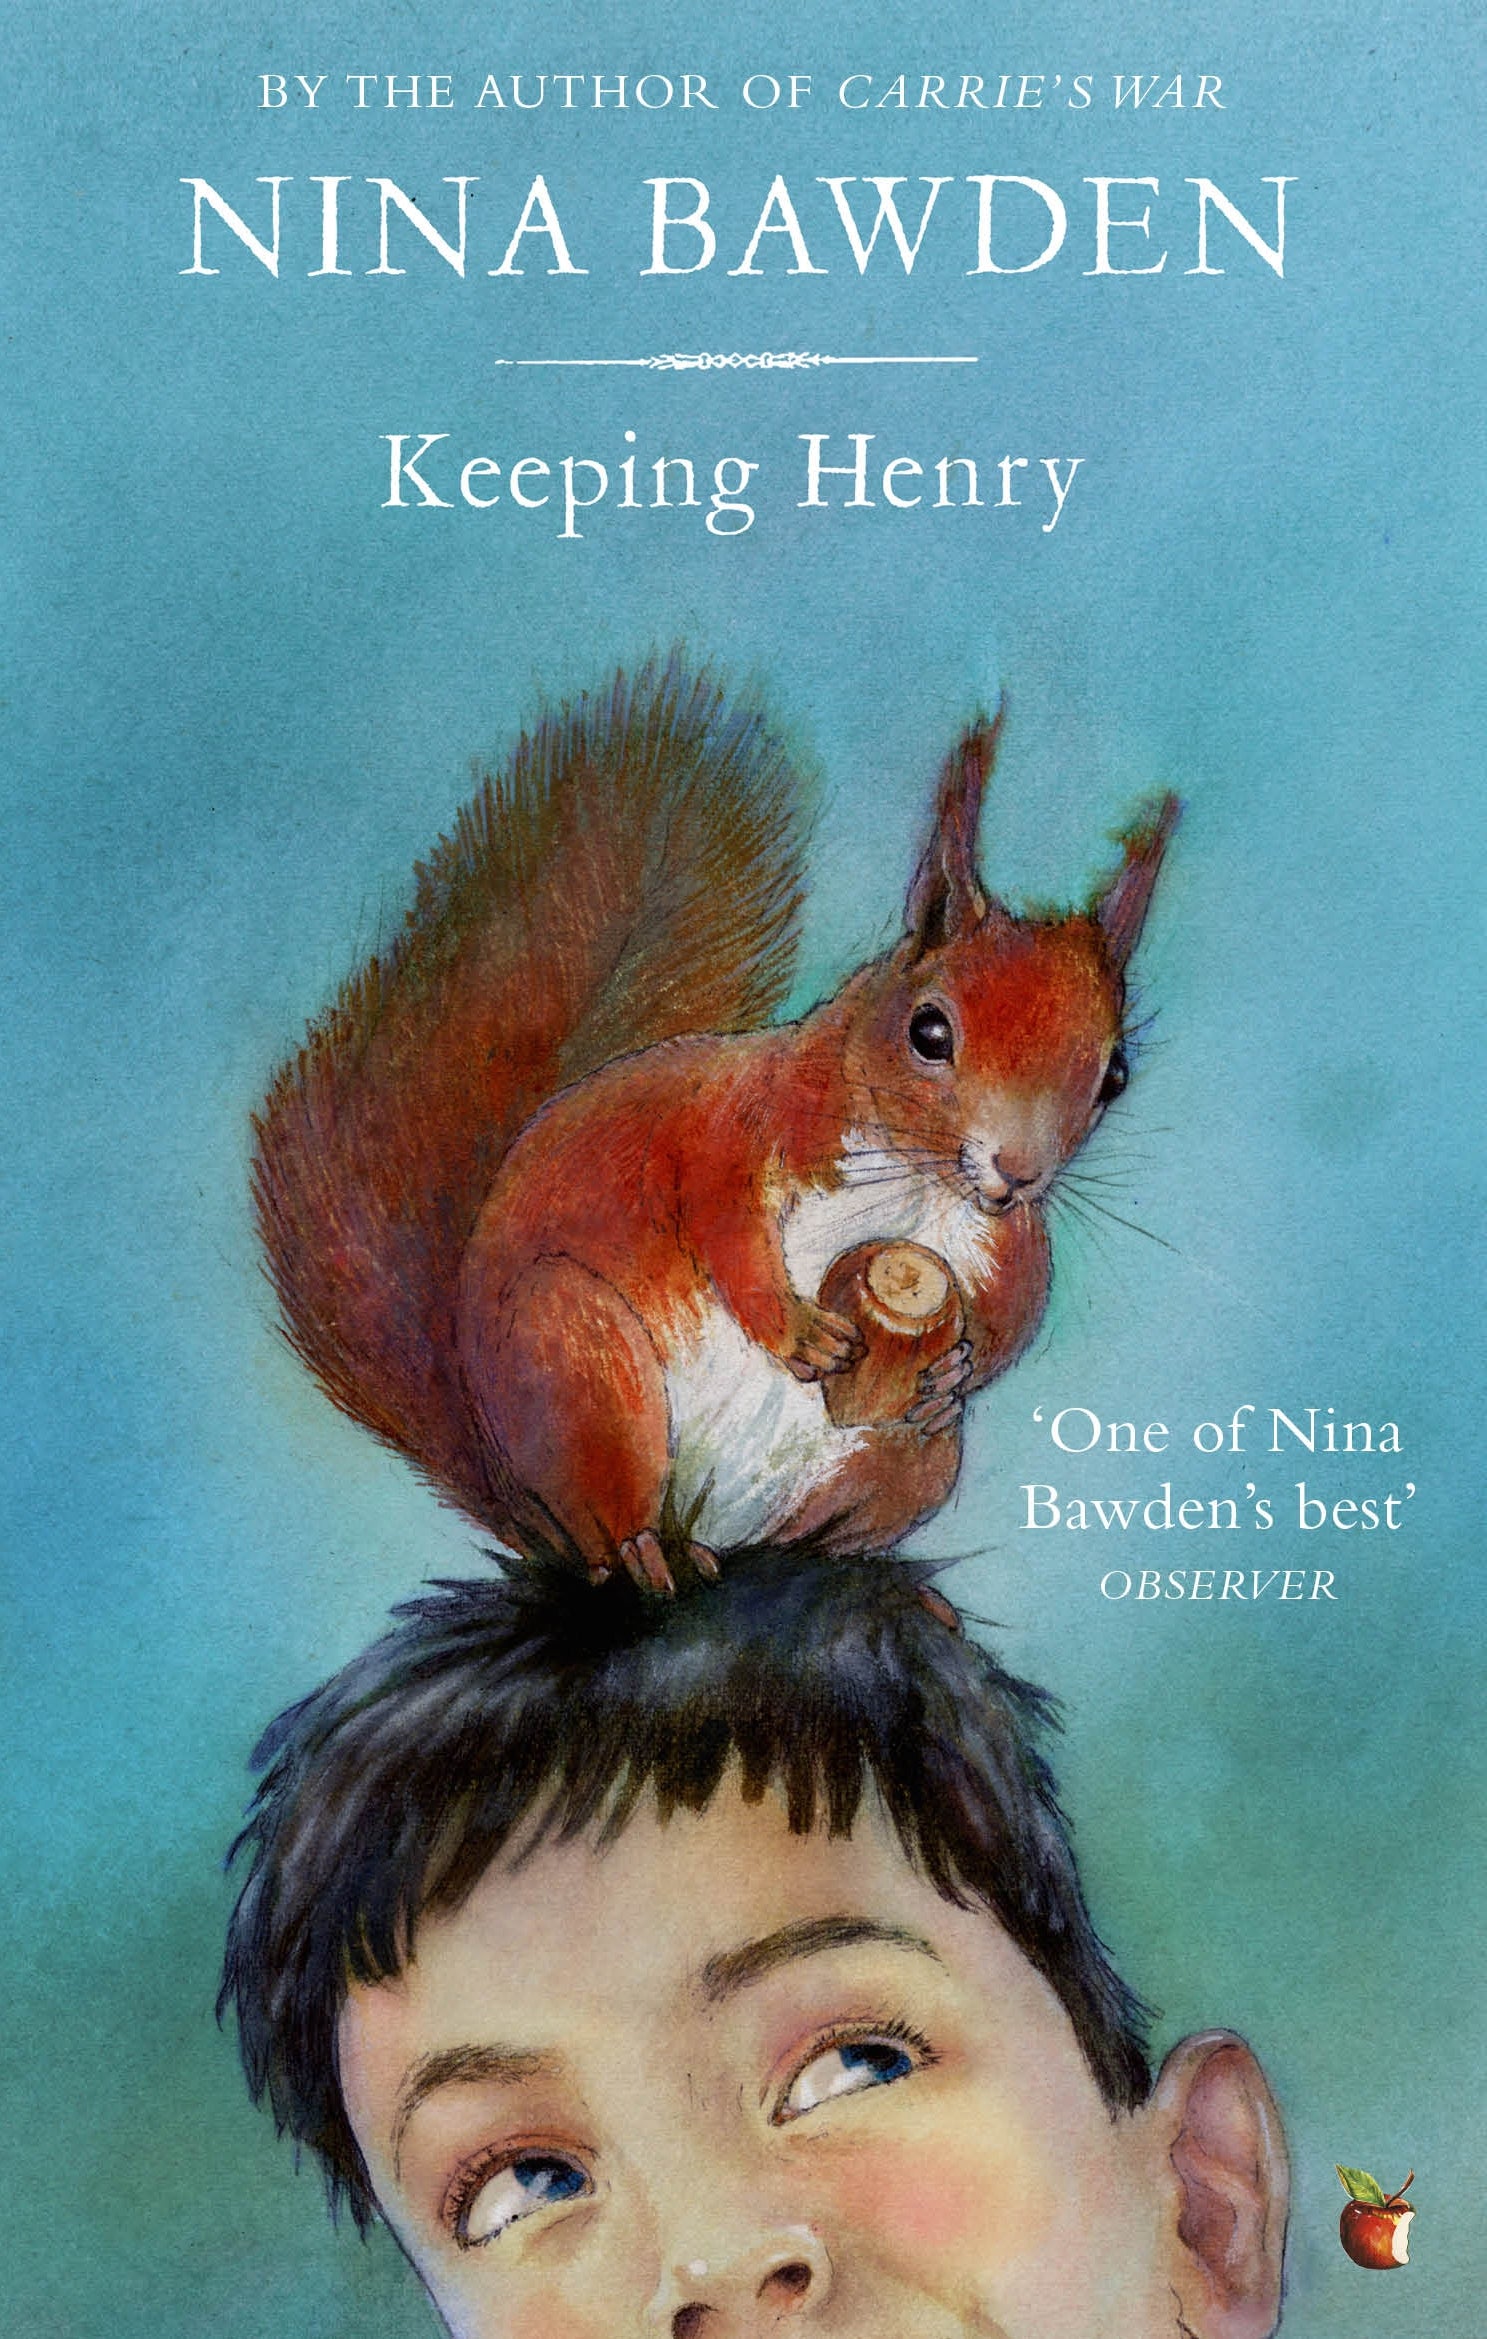 Keeping Henry by Nina Bawden, Alan Marks